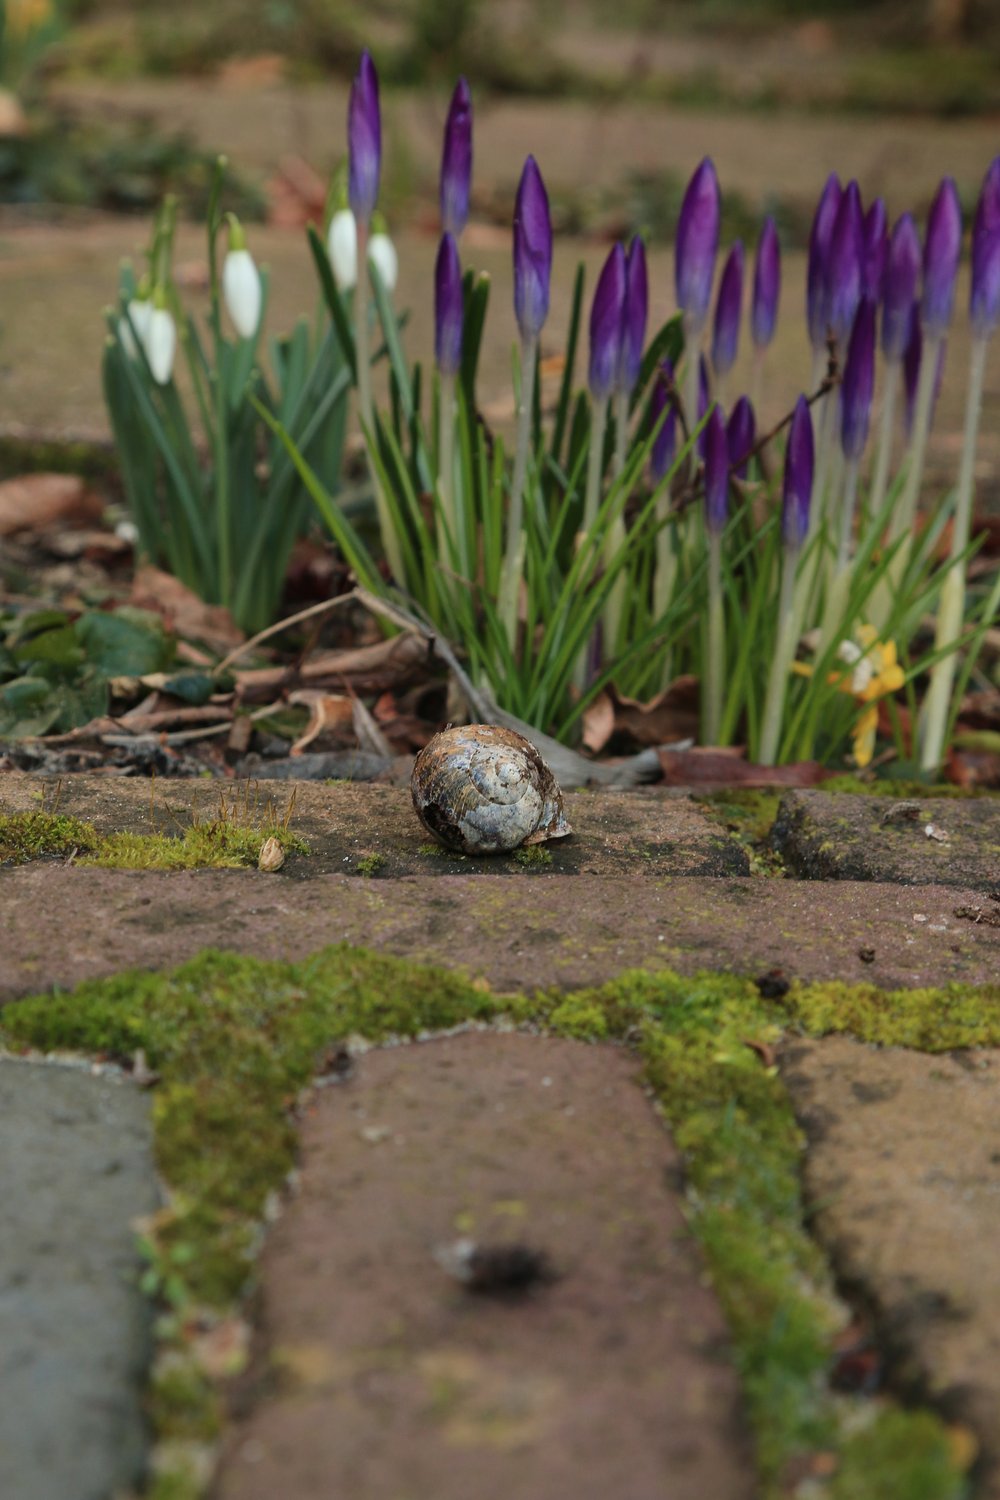 Snowdrops and Crocus in gaps of paving